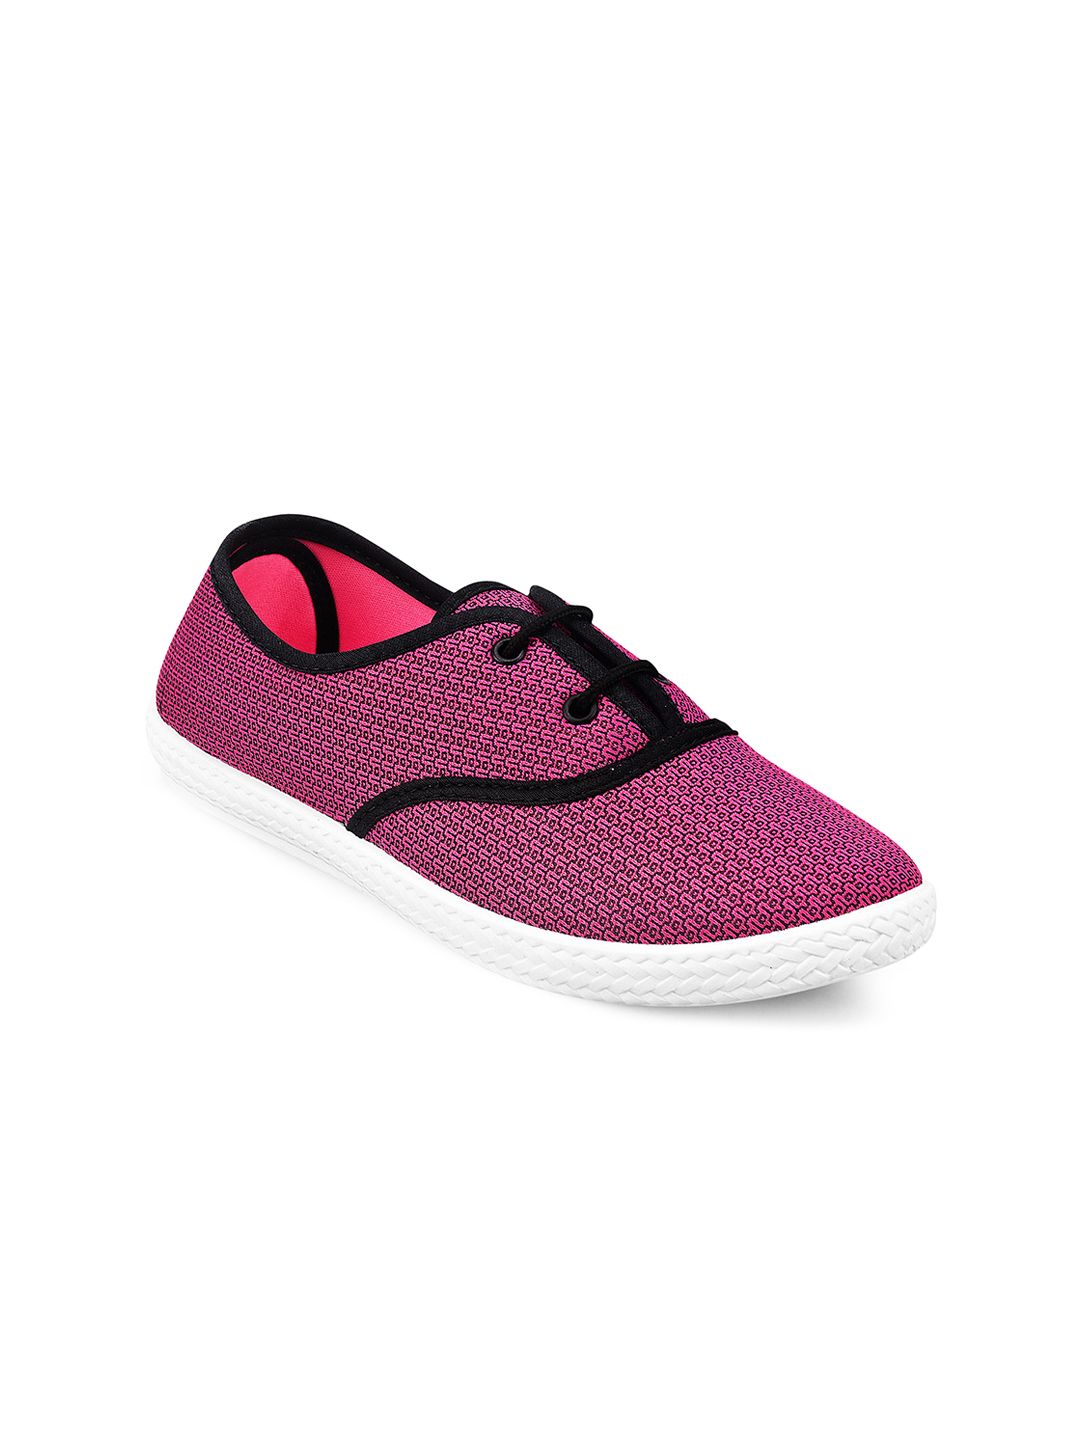 Paragon Women Woven Design Lightweight Sneakers Price in India